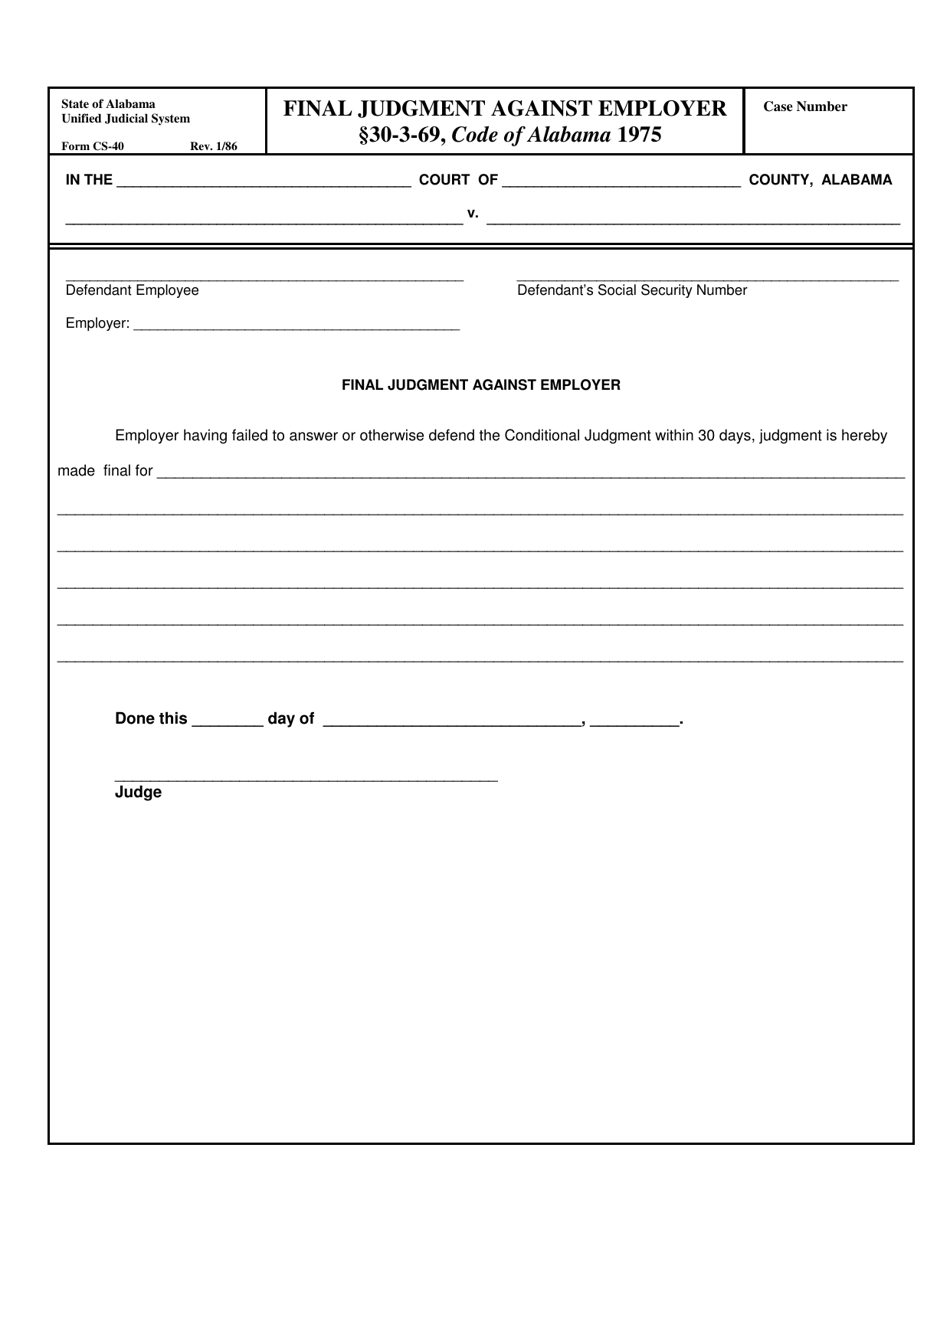 Form CS-40 Final Judgment Against Employer - Alabama, Page 1